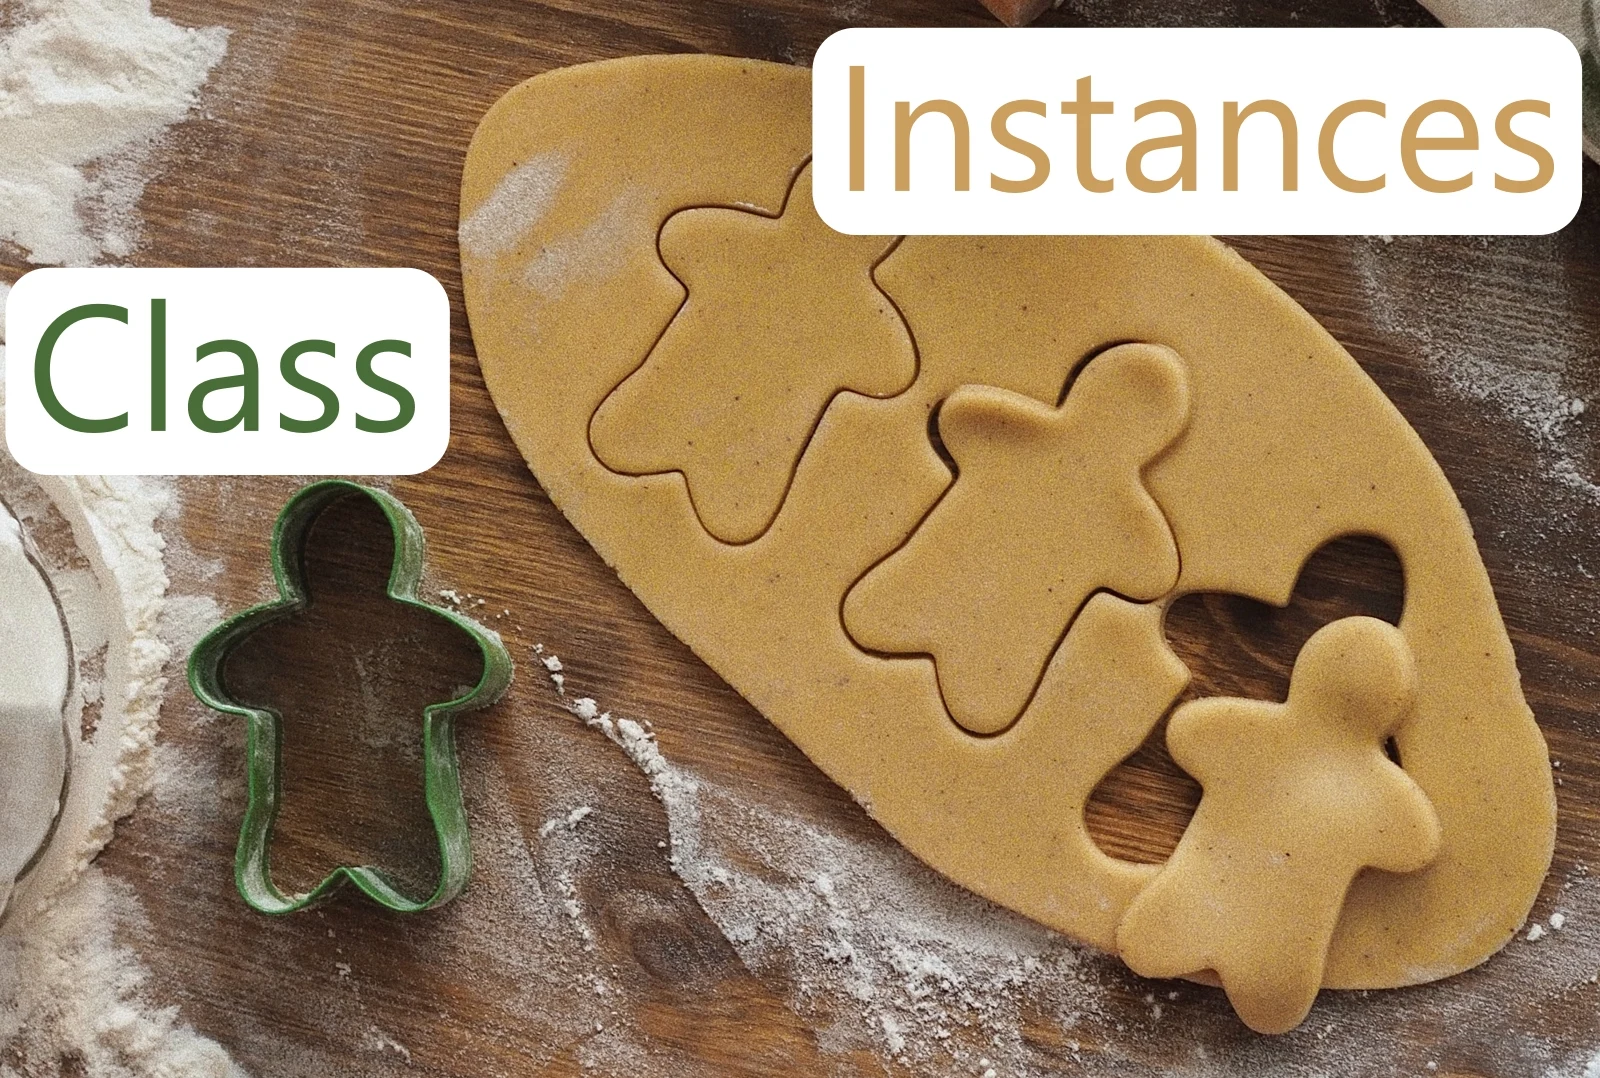 A green cookie cutter, marked "Class" and a few unbaked cookies, marked "Instances"